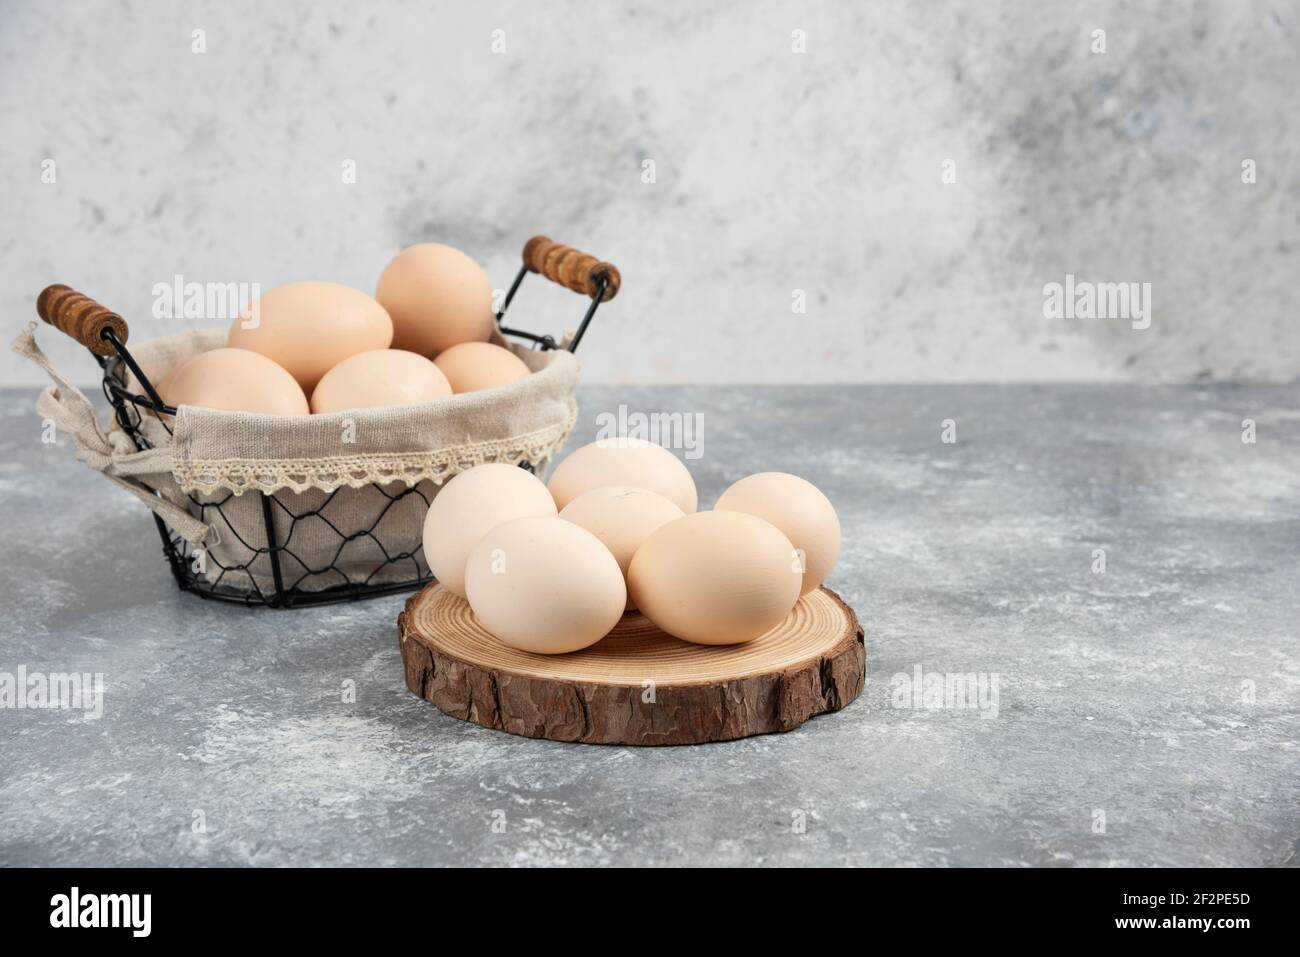 Basket of organic fresh uncooked eggs placed on marble surface Stock Photo